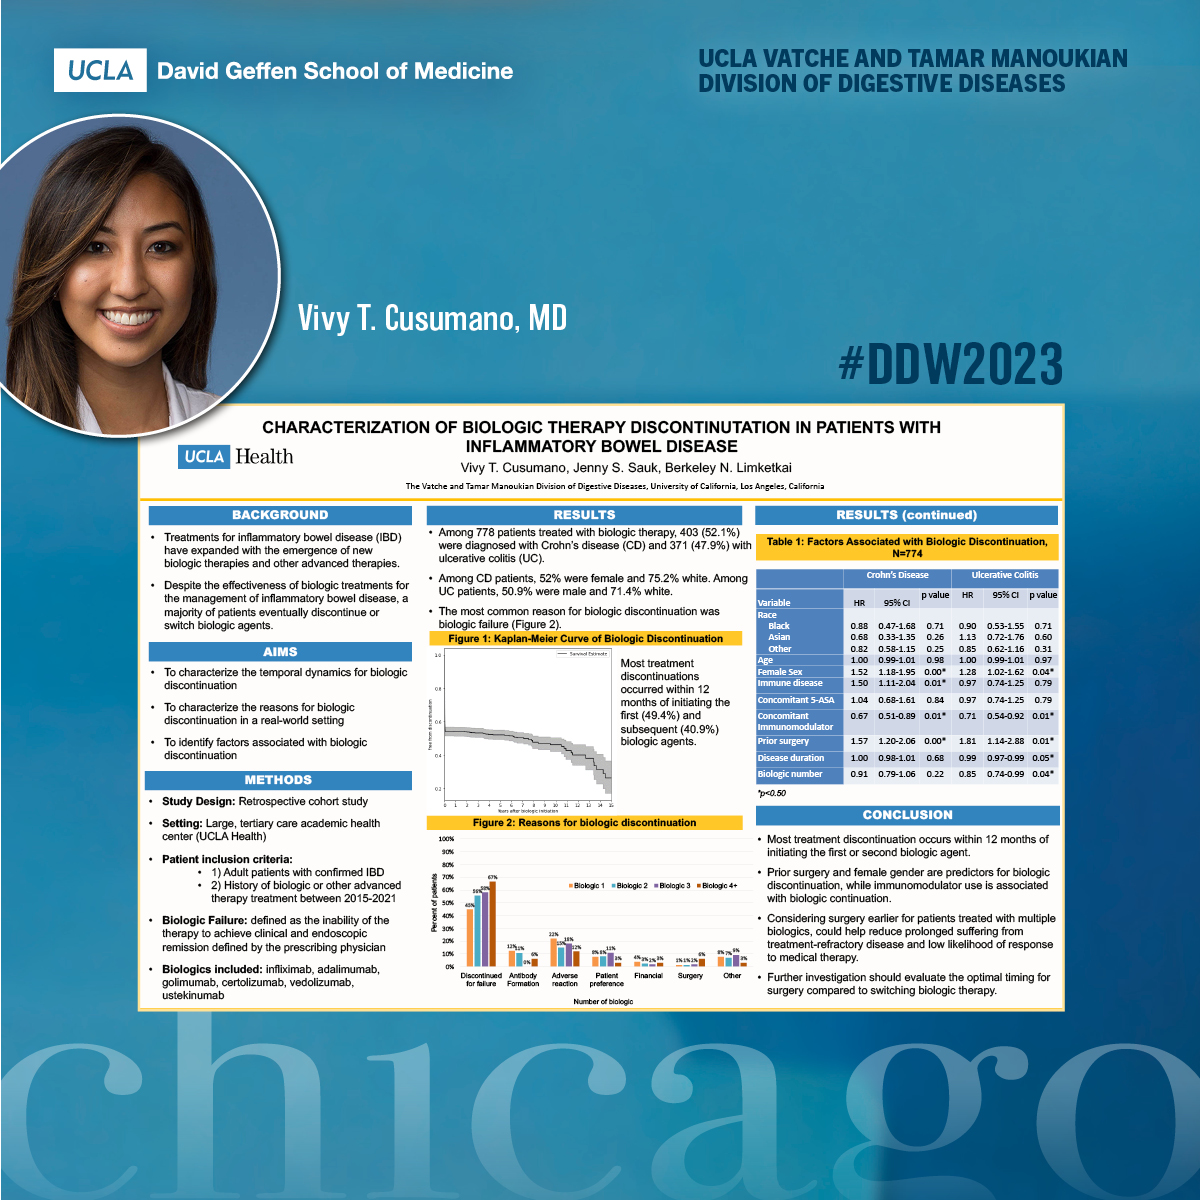 Characterization of Biologic Therapy Discontinuation in Patients with Inflammatory Bowel Disease (#IBD)

🤩Vivy T. Cusumano (@VivyCmd)
👥Jenny Sauk @berkeleydoc

🔸#DDW2023 Poster Session
🔸Tuesday, May 9
🔸12:30 pm
🔸South Hall A, Poster Hall McCormick Place